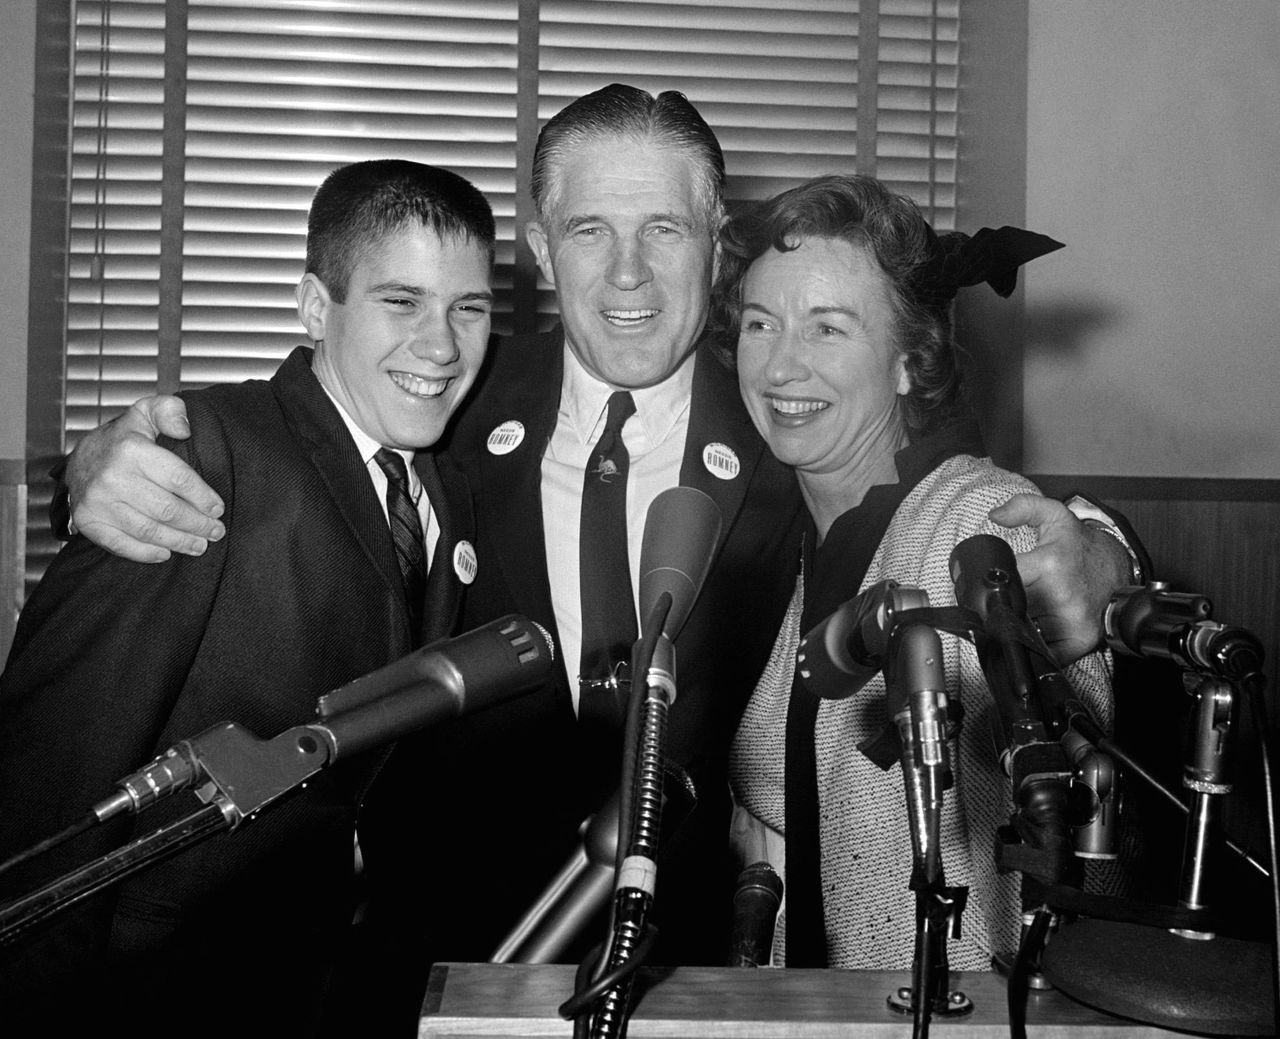 A young Mitt Romney with his parents, George W. and Lenore Romney, in 1962. 